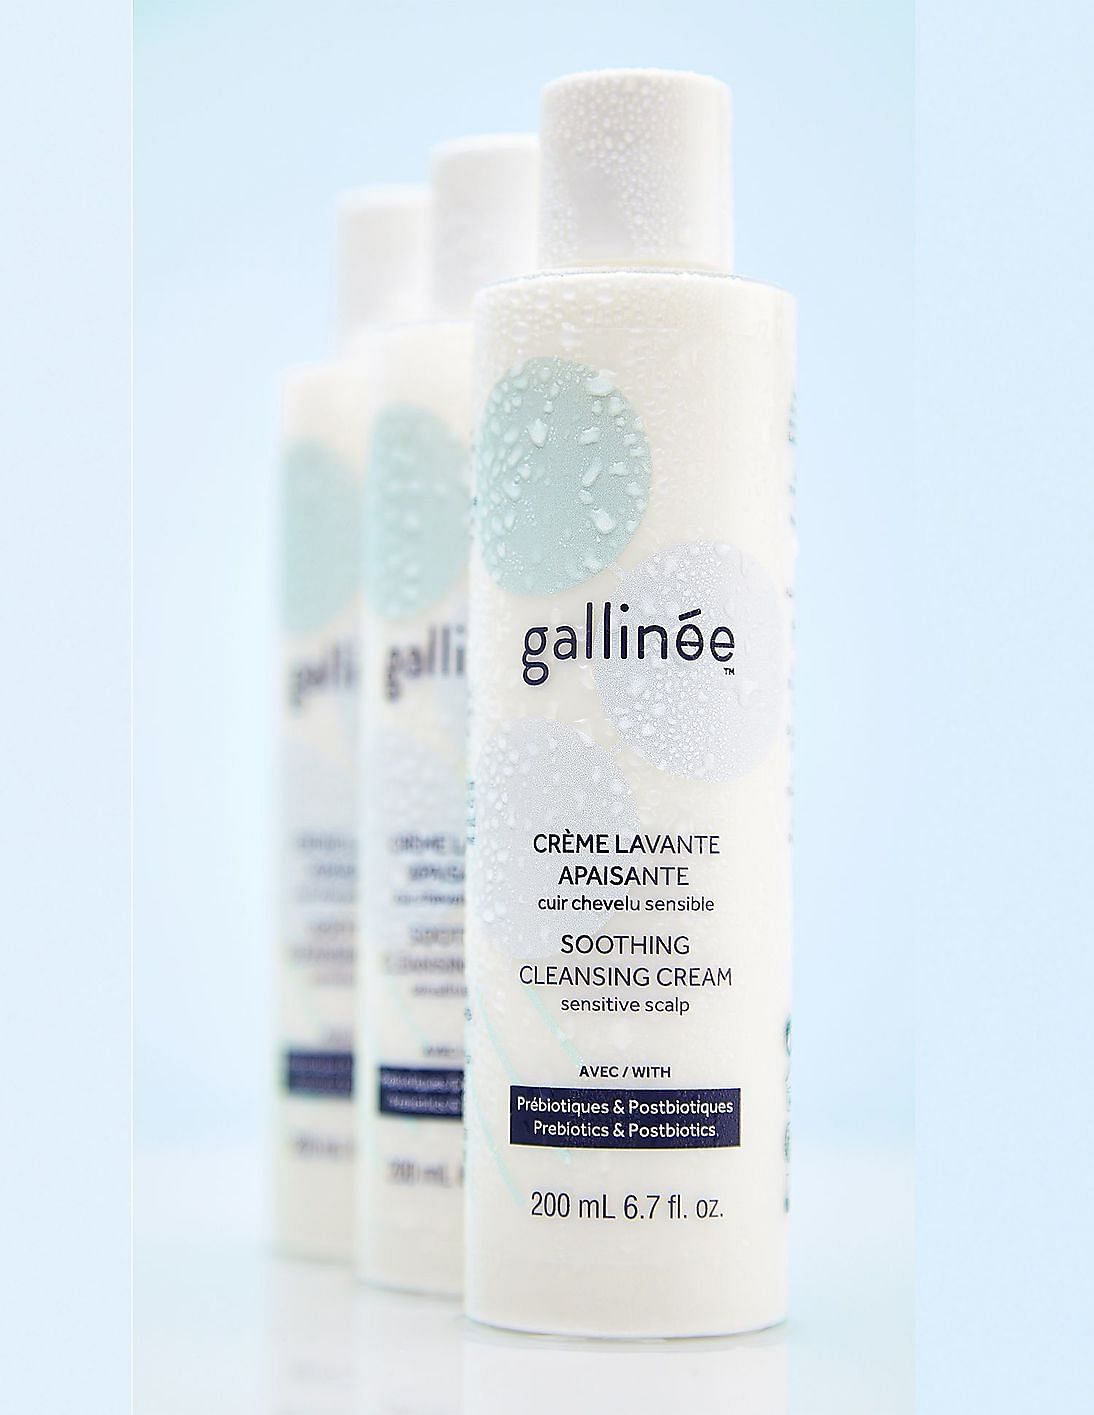 Gallinee Soothing Cleansing Cream NNNOW.com